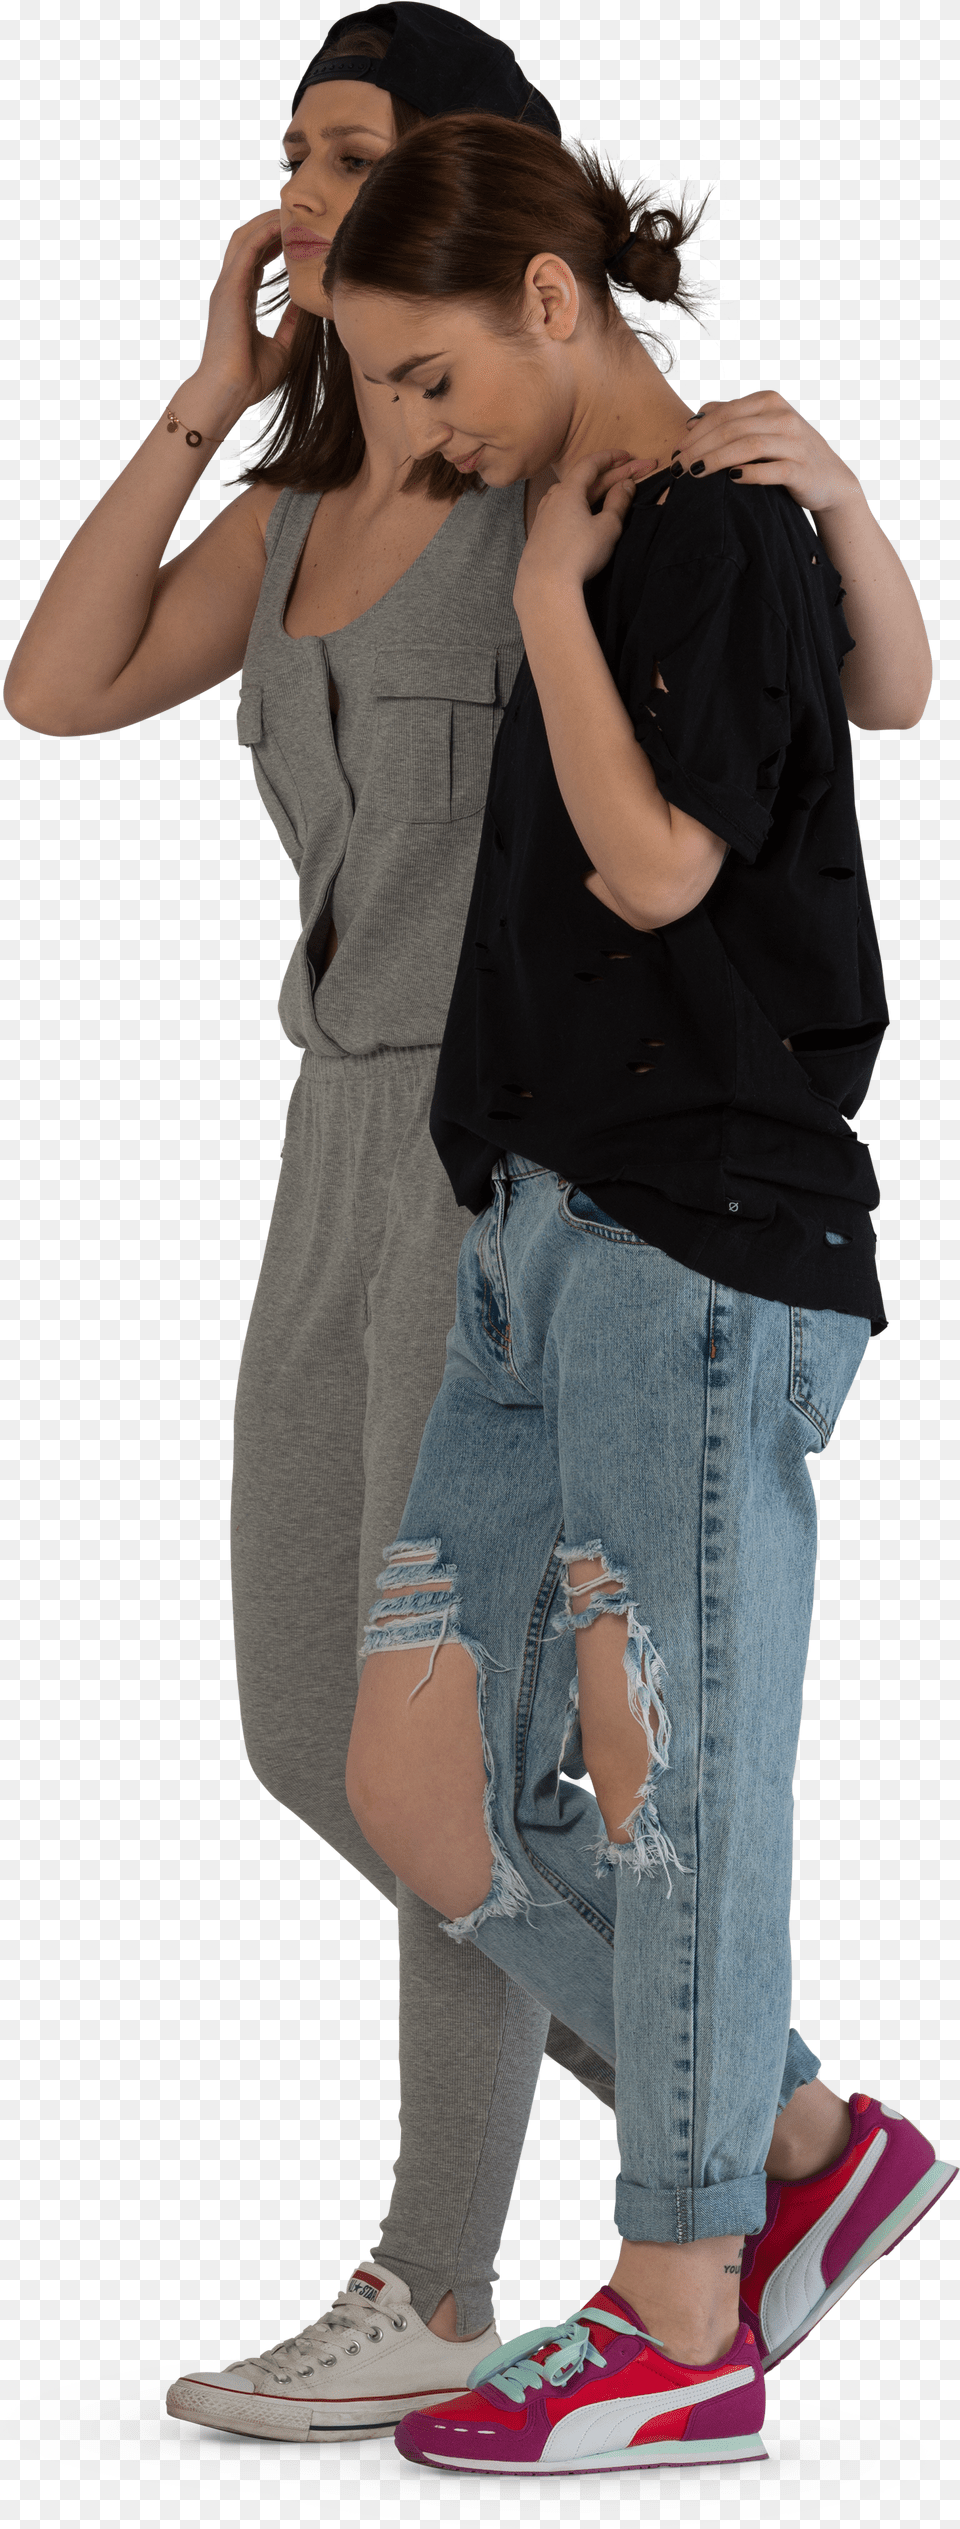 Cut Out People Cutout People Photos Girl Free Transparent Png